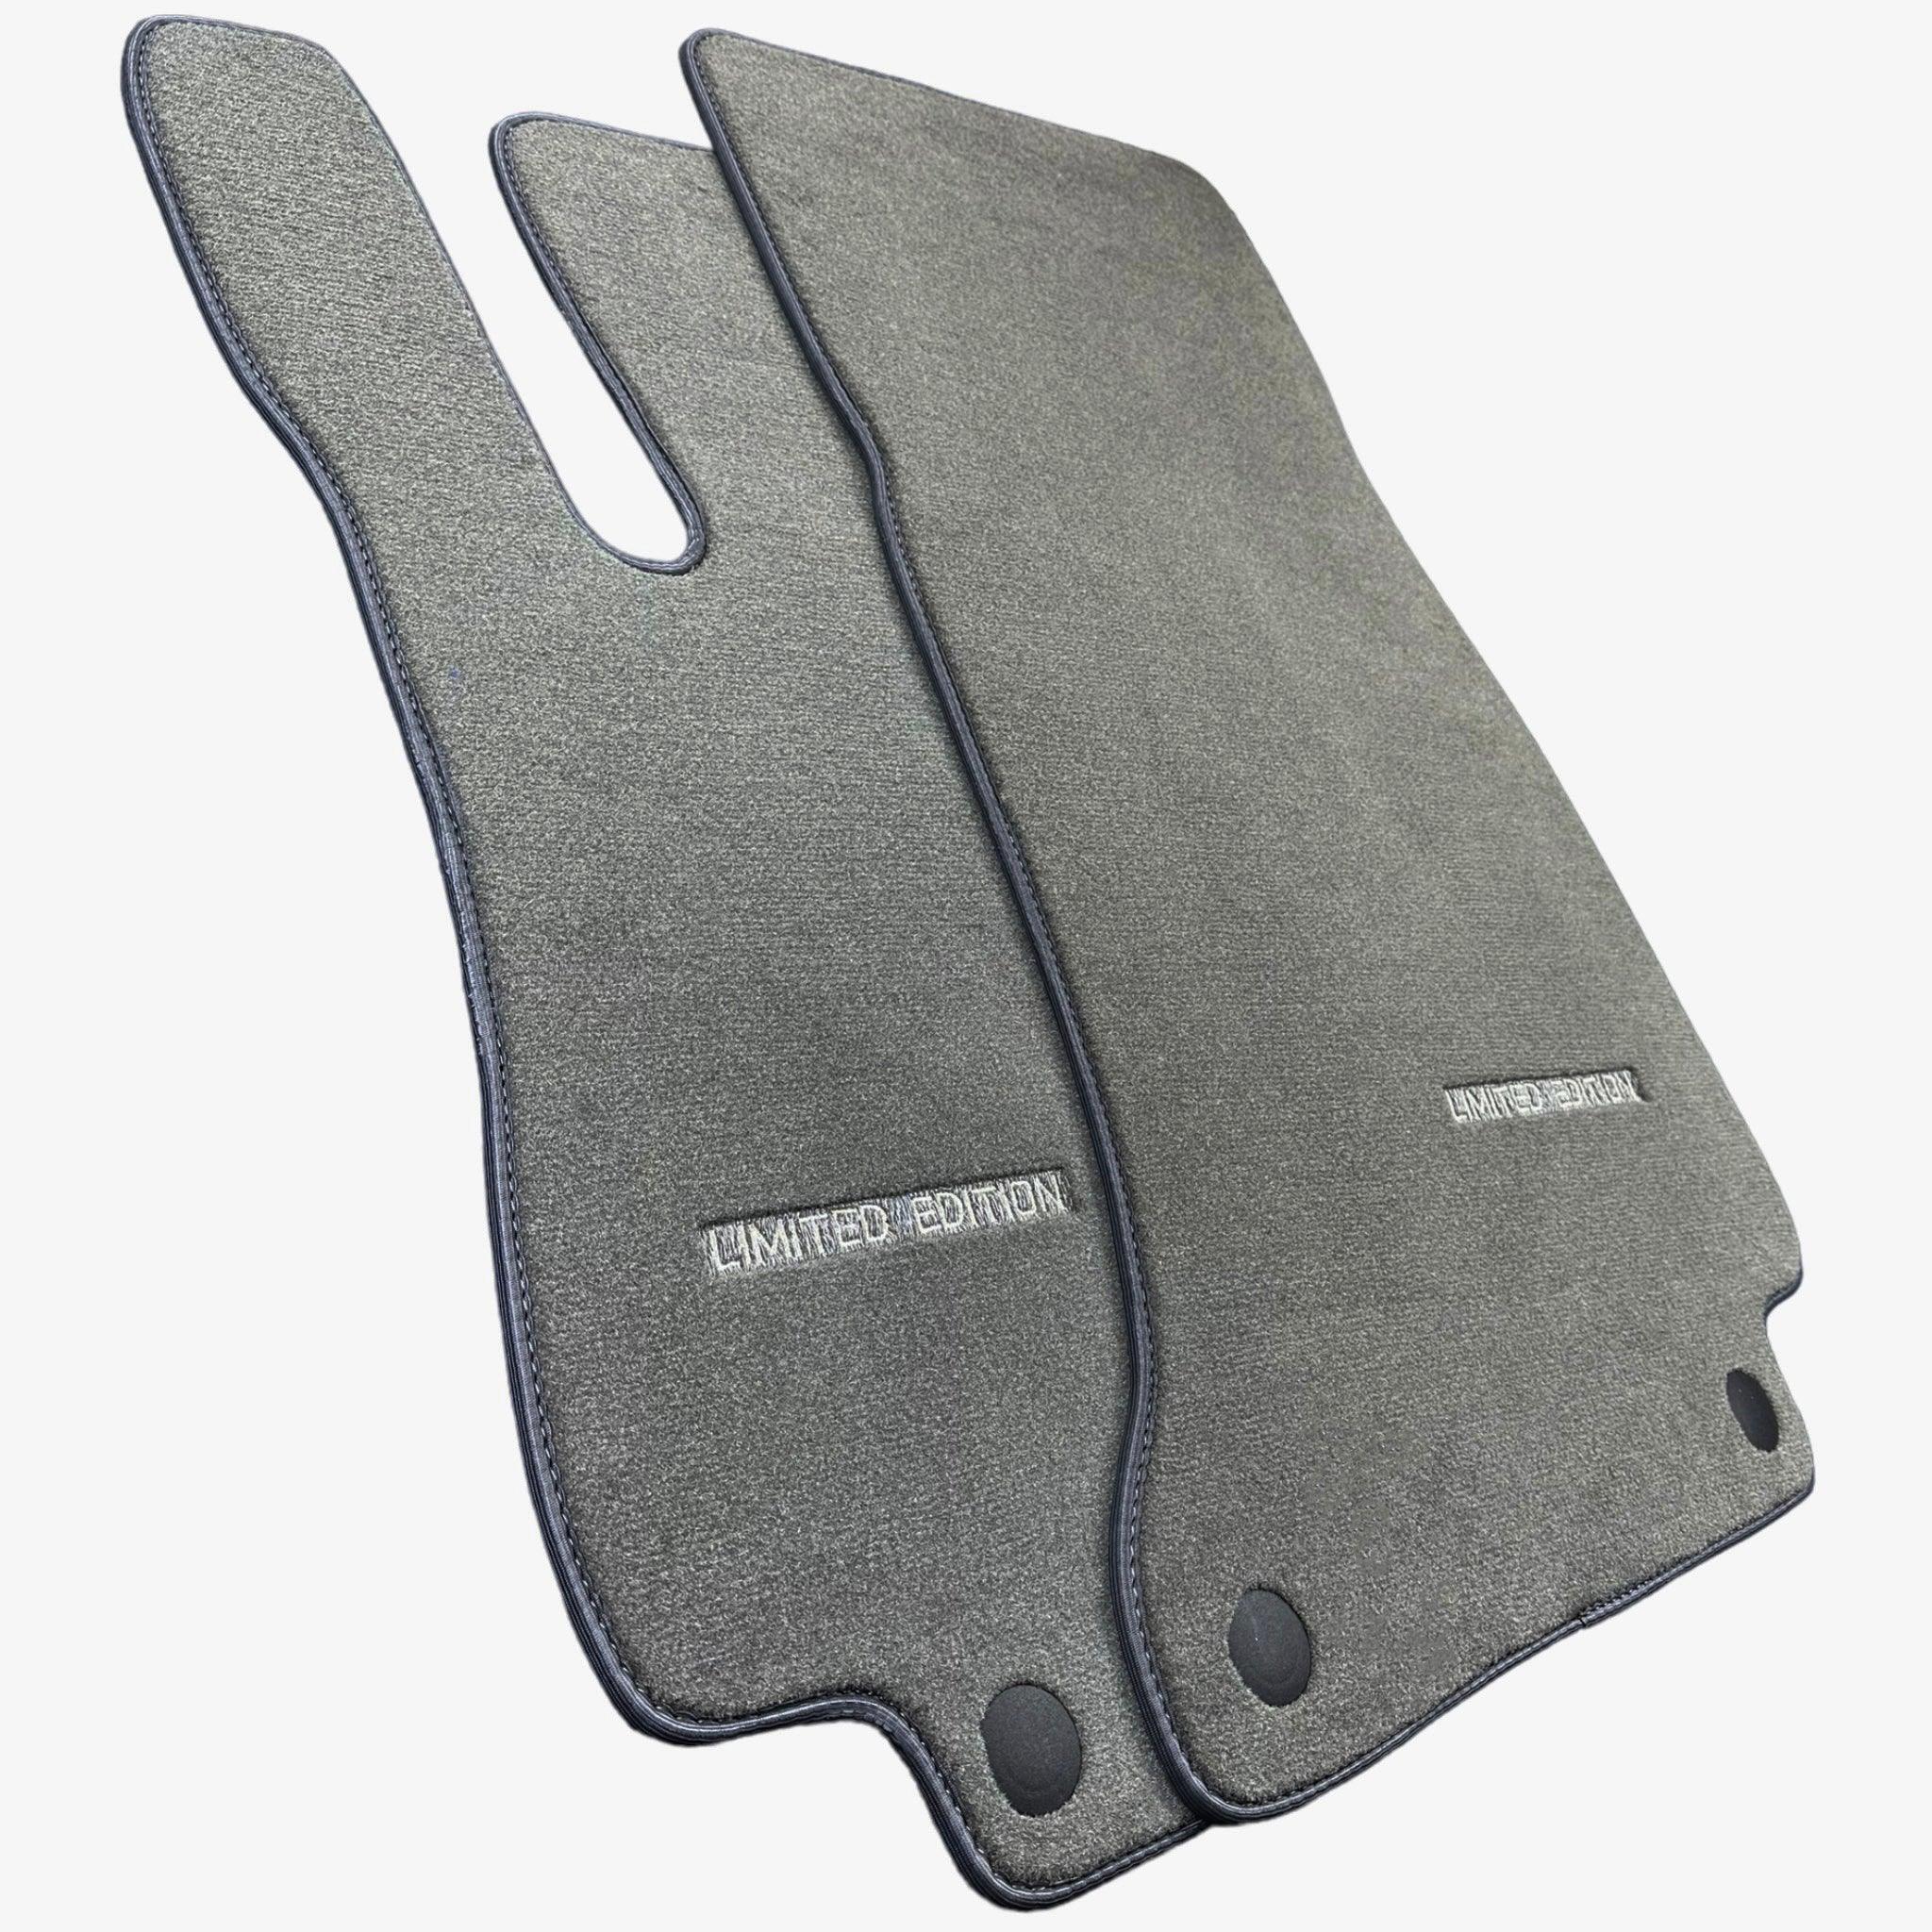 Gray Floor Mats For Mercedes Benz GLA-Class X156 (2017-2020) | Limited Edition